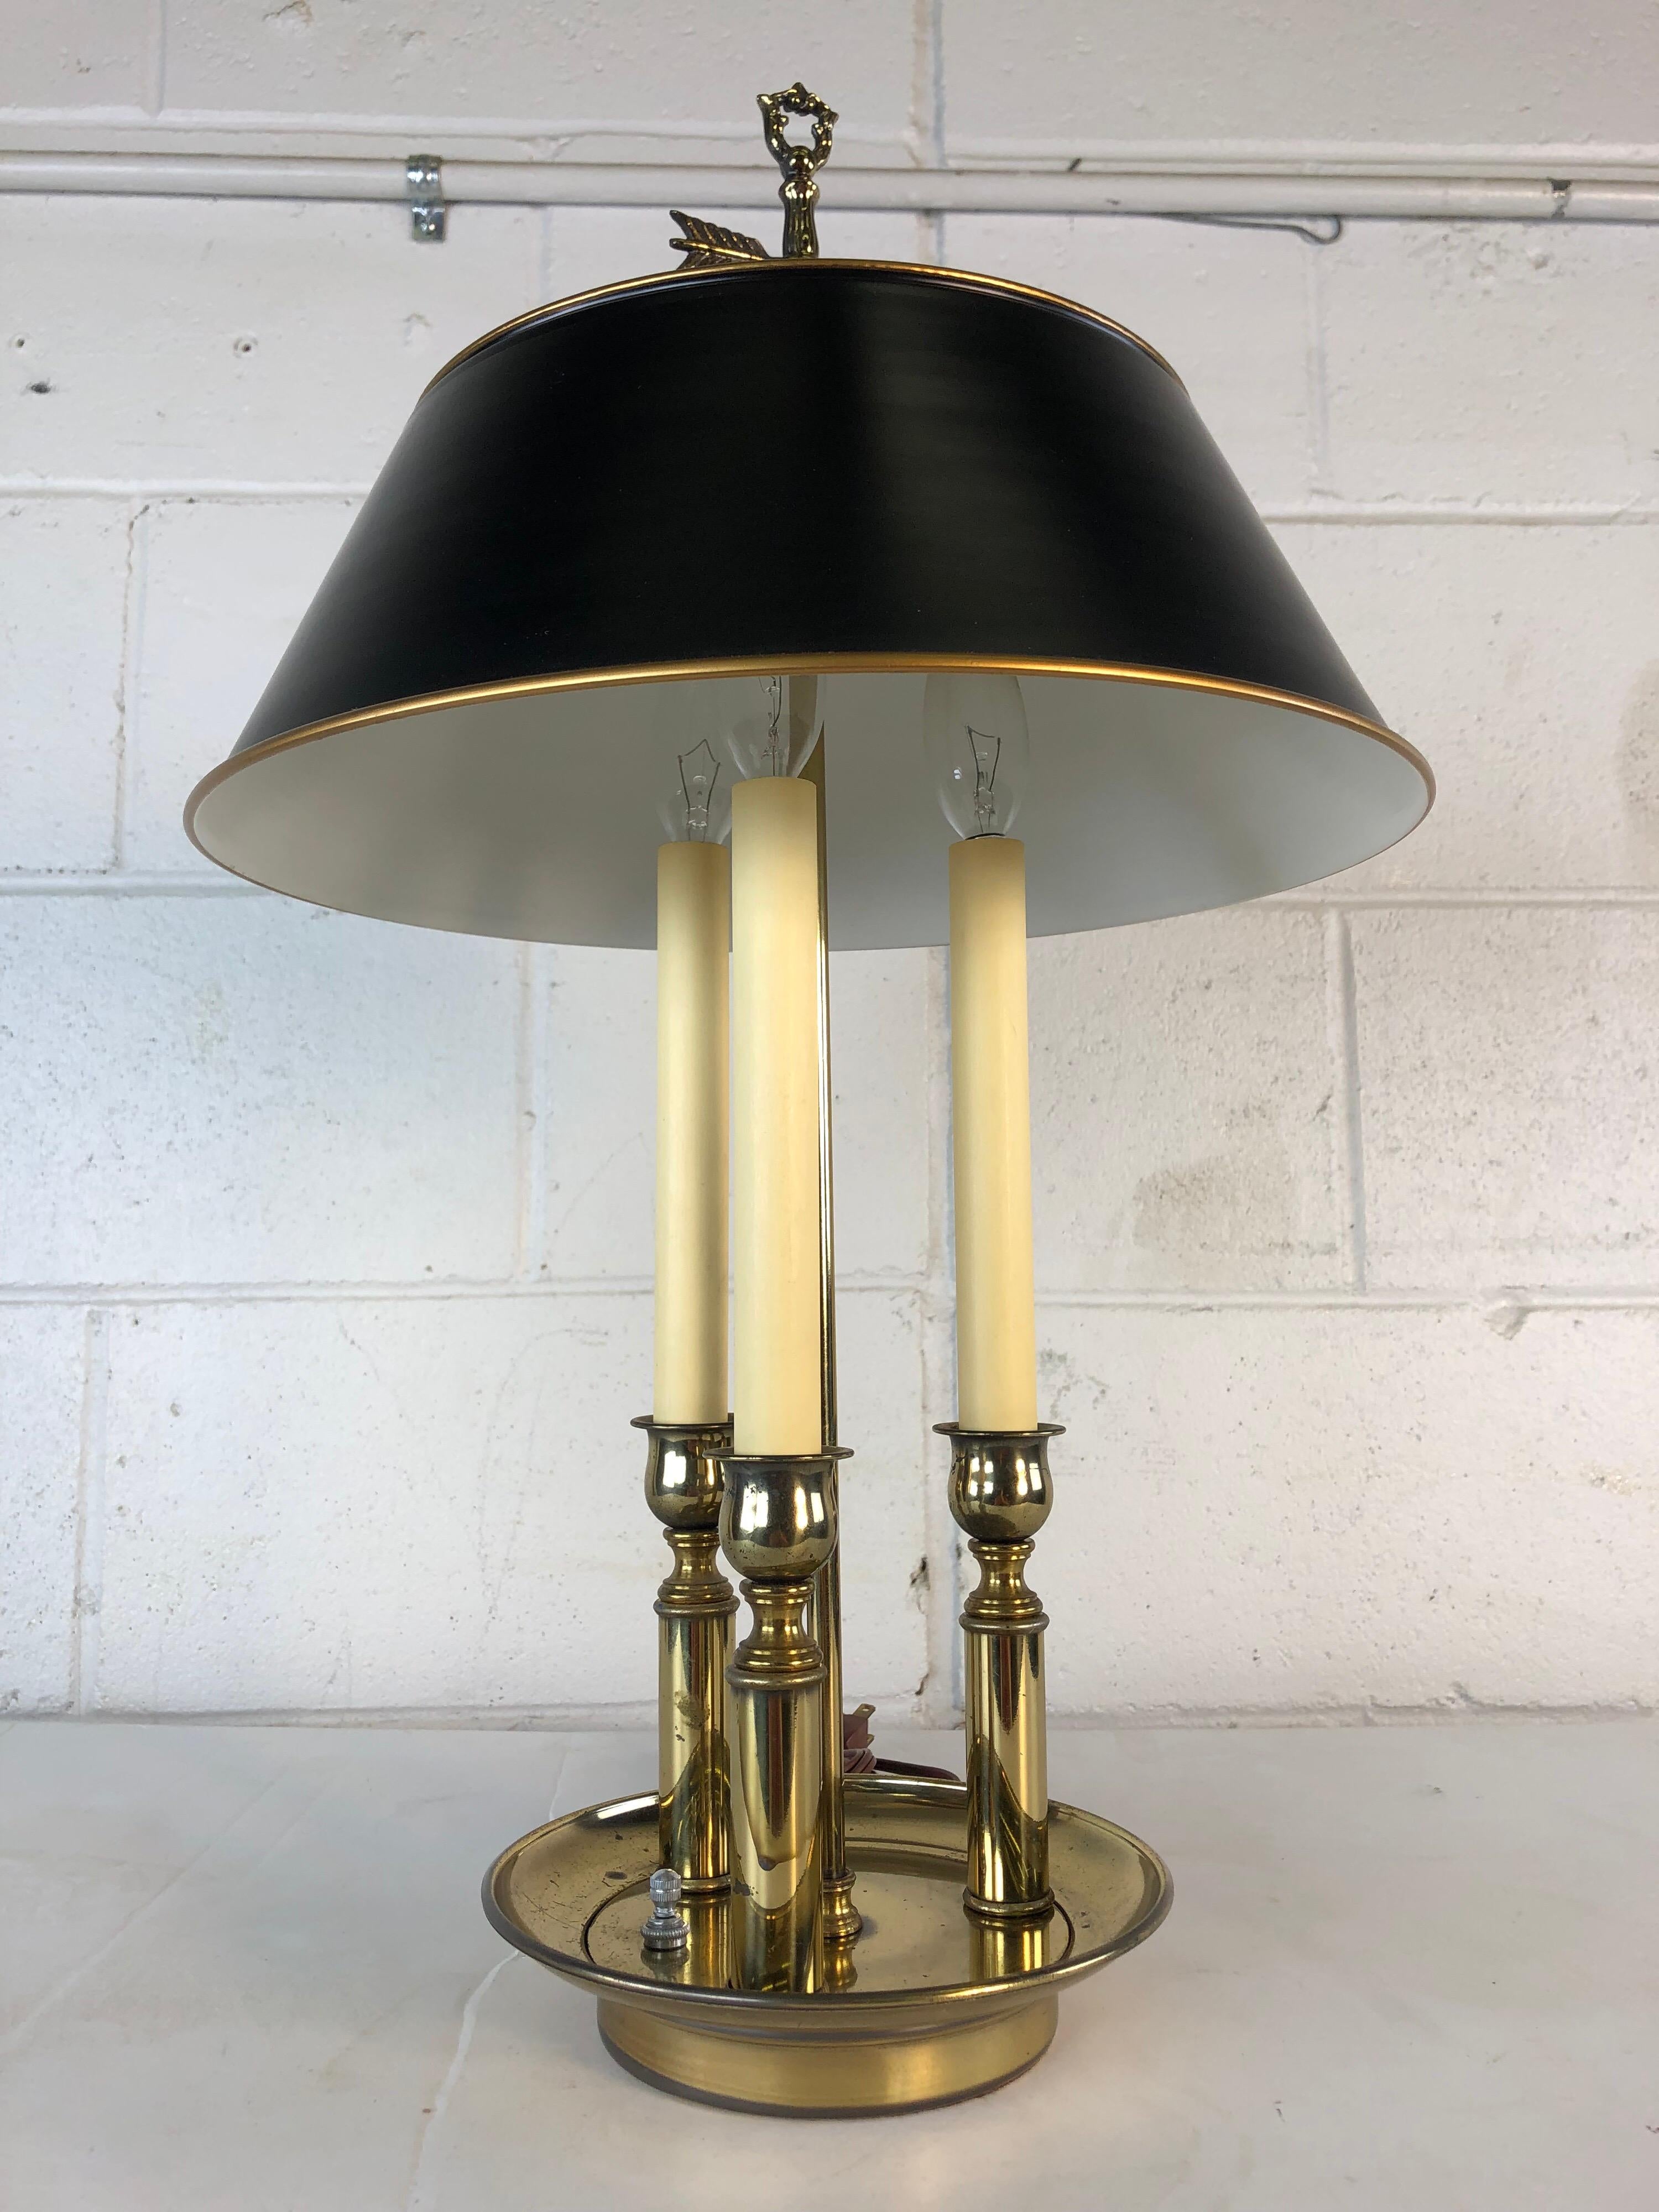 Mid-20th century black and gold metal bouillotte desk table lamp. Has three chandelier lights and they operate separately or all together. Wired for the US and in working condition. Shade alone measures 13” diameter x 5” height. Brass has some